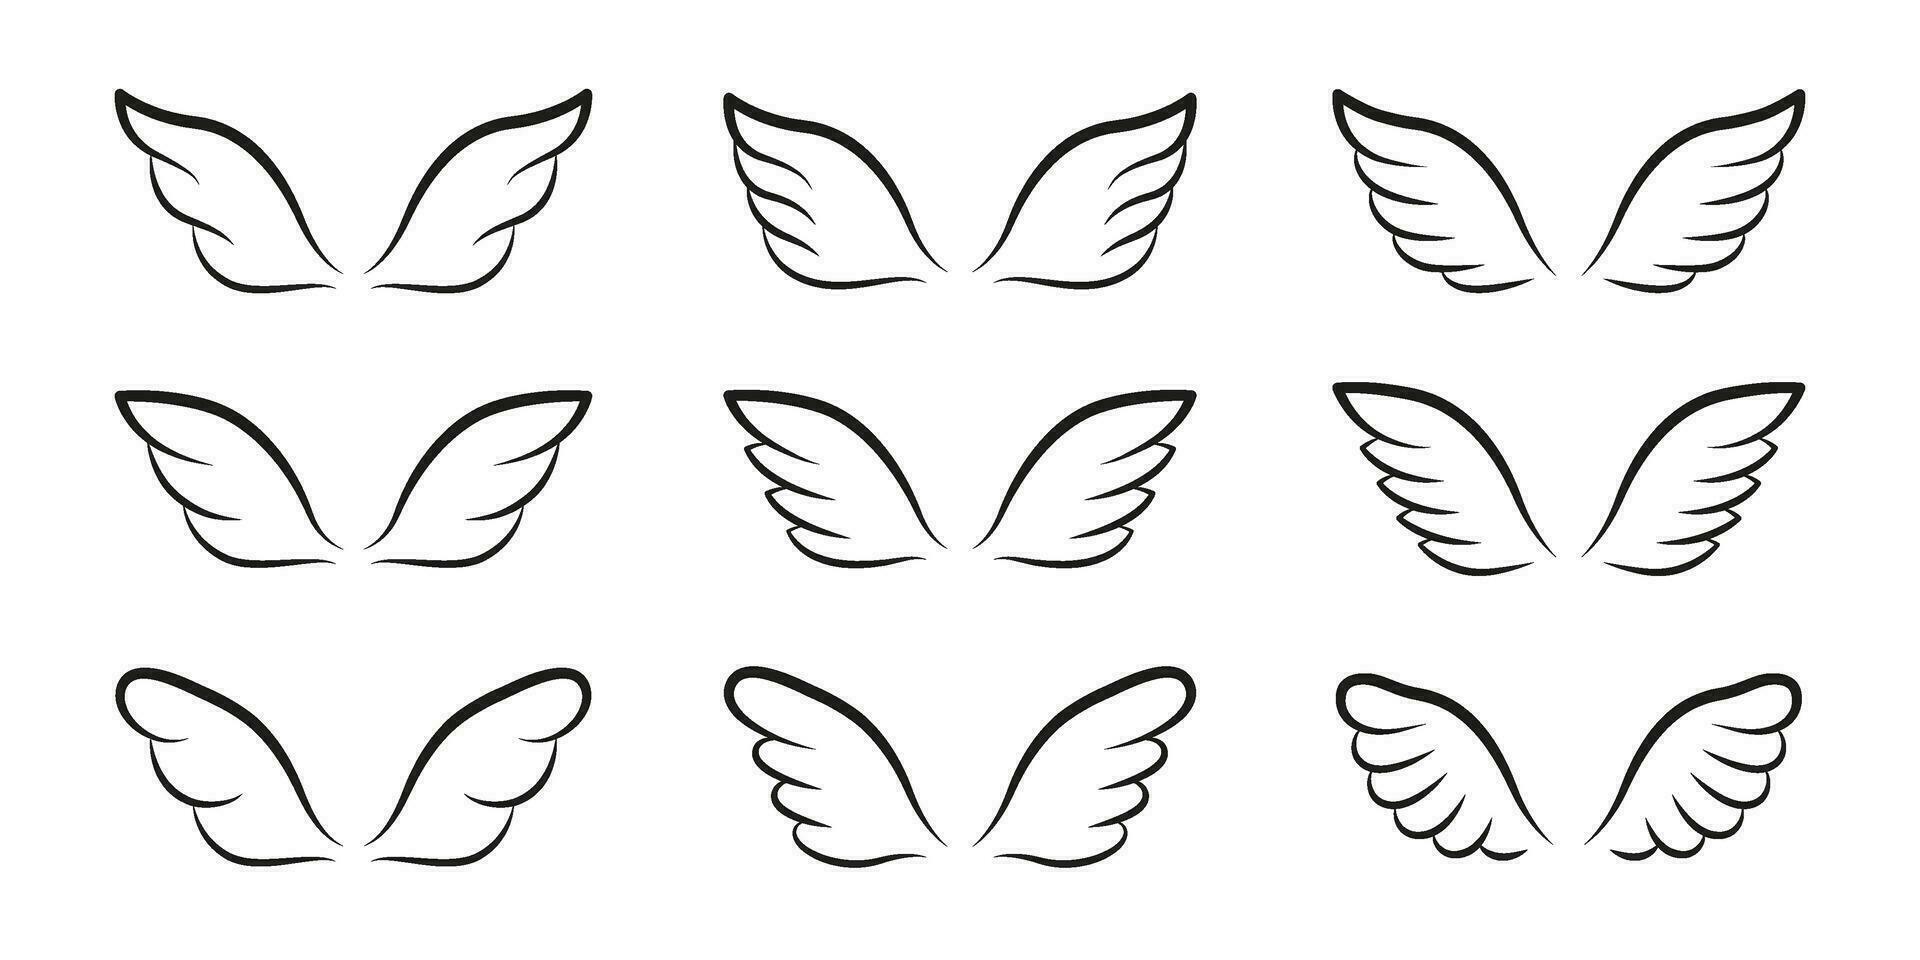 Wings line template icon set. Wings for fly bird, angel and religious symbol. Collection wings badges decorative shapes. Vector illustration